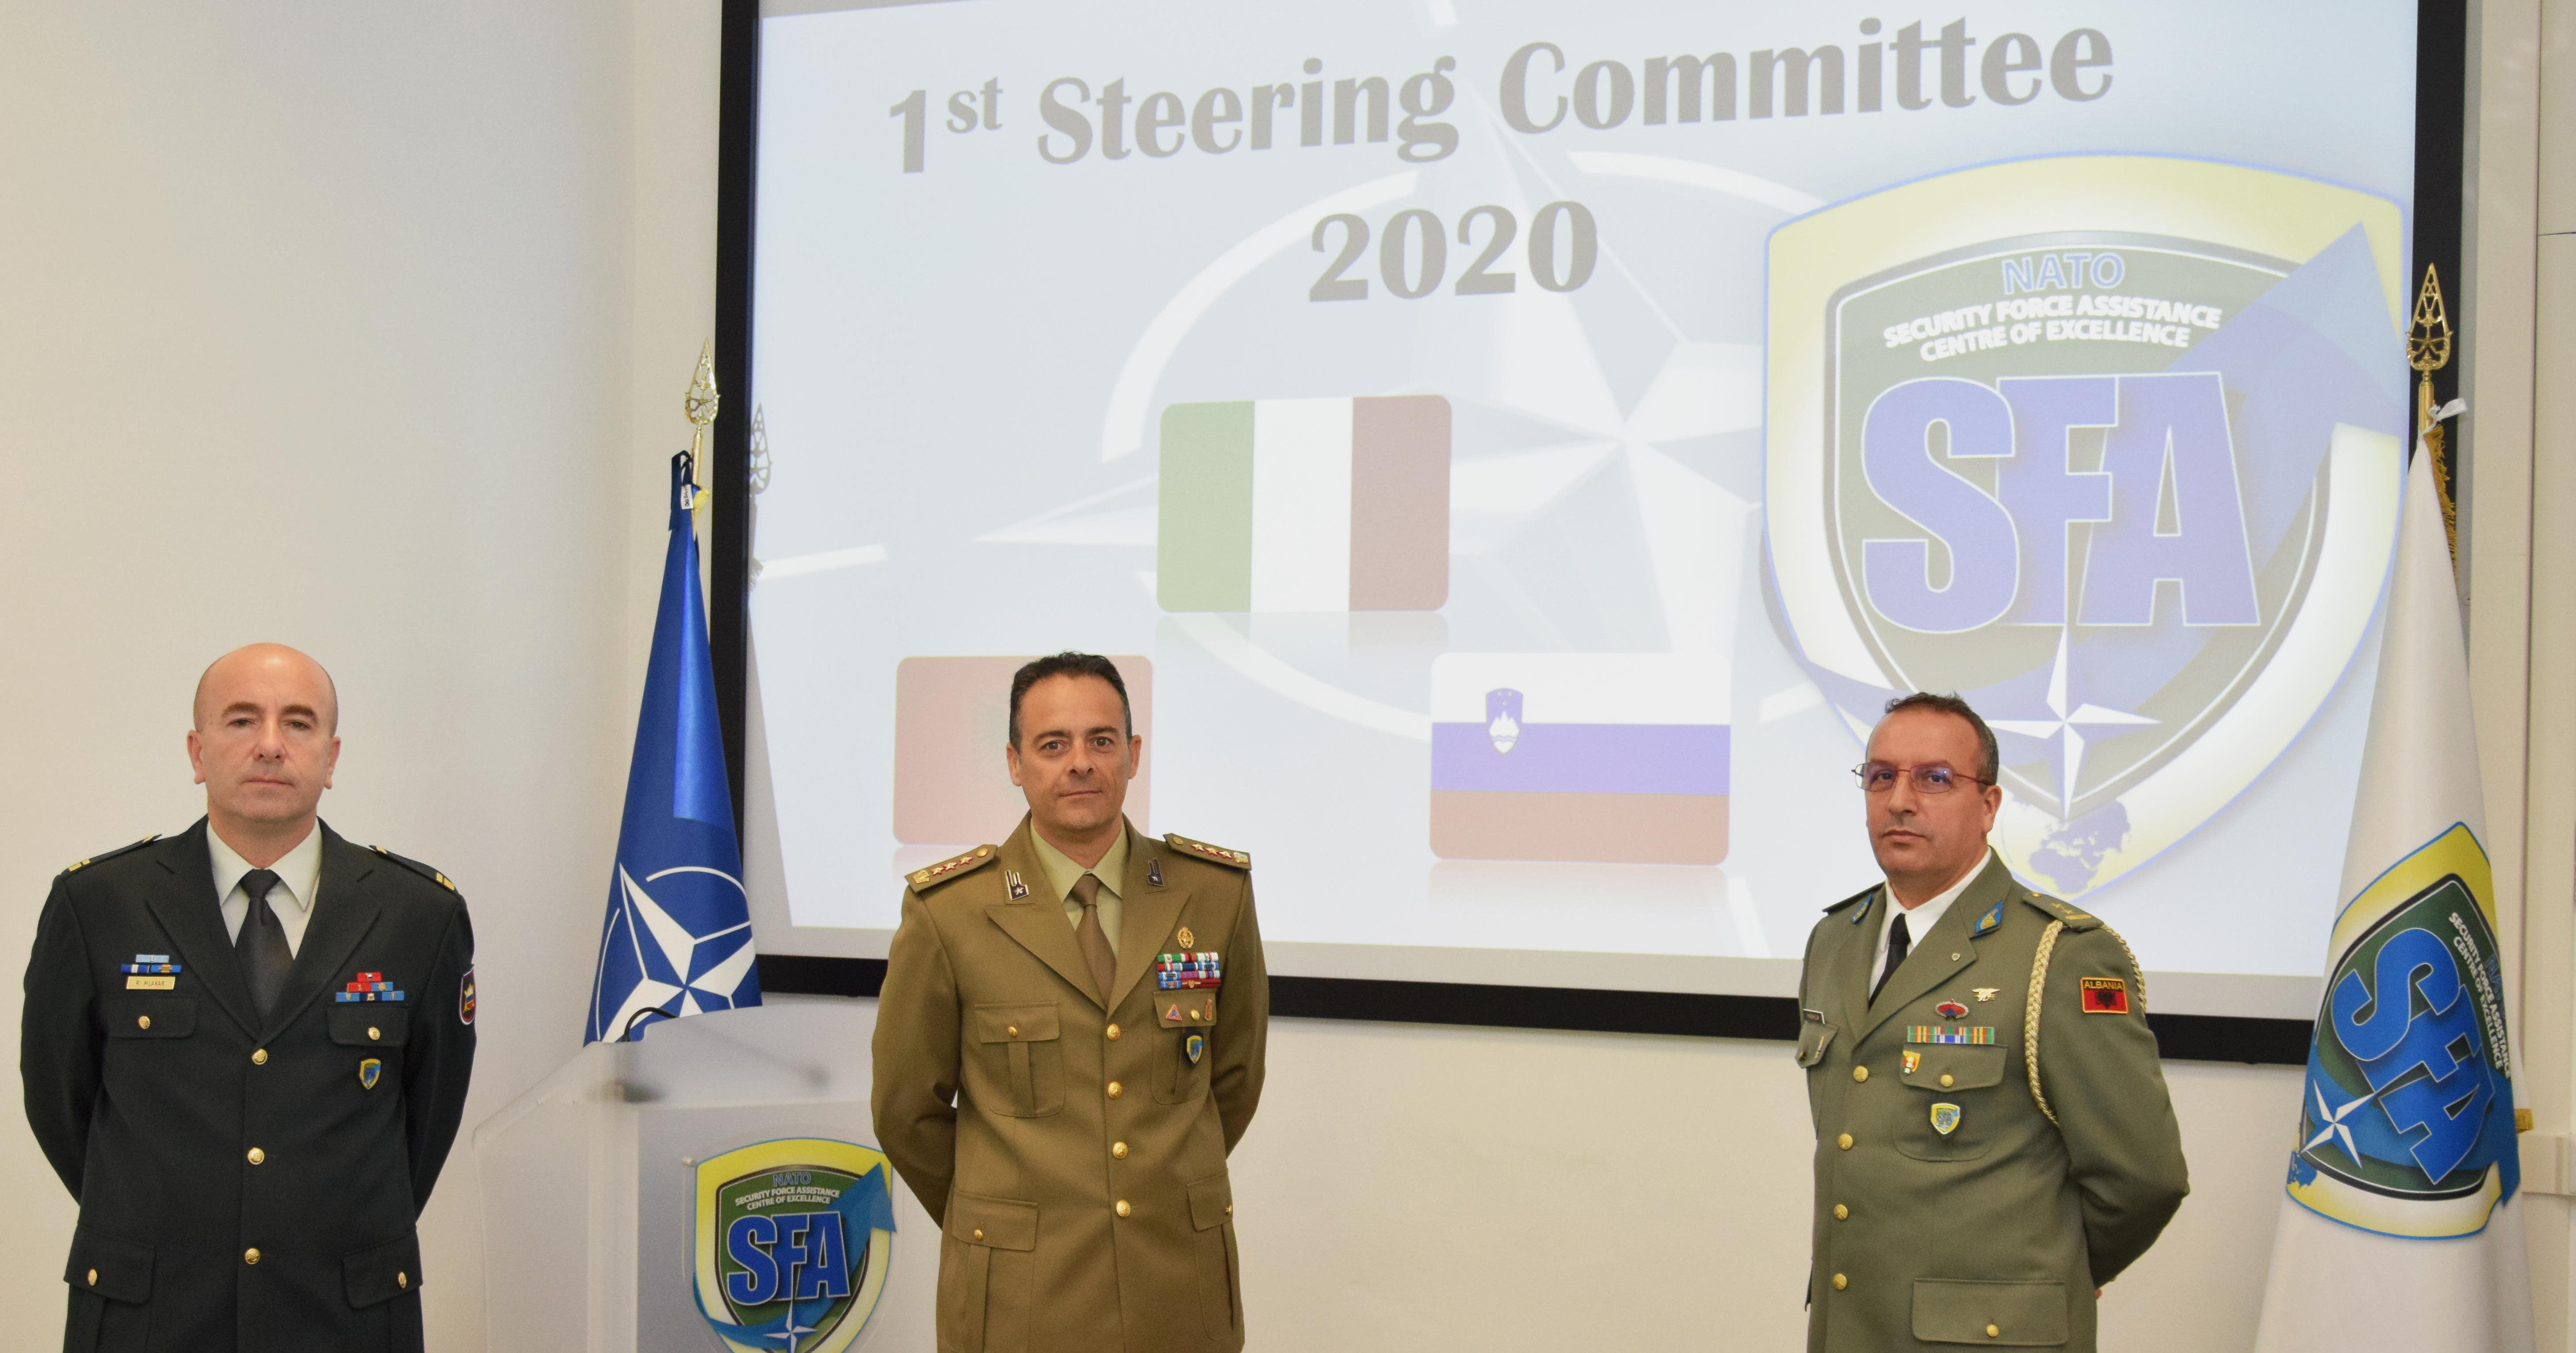 Virtual 1st Steering Committee meeting 2020 for the NATO SFA COE